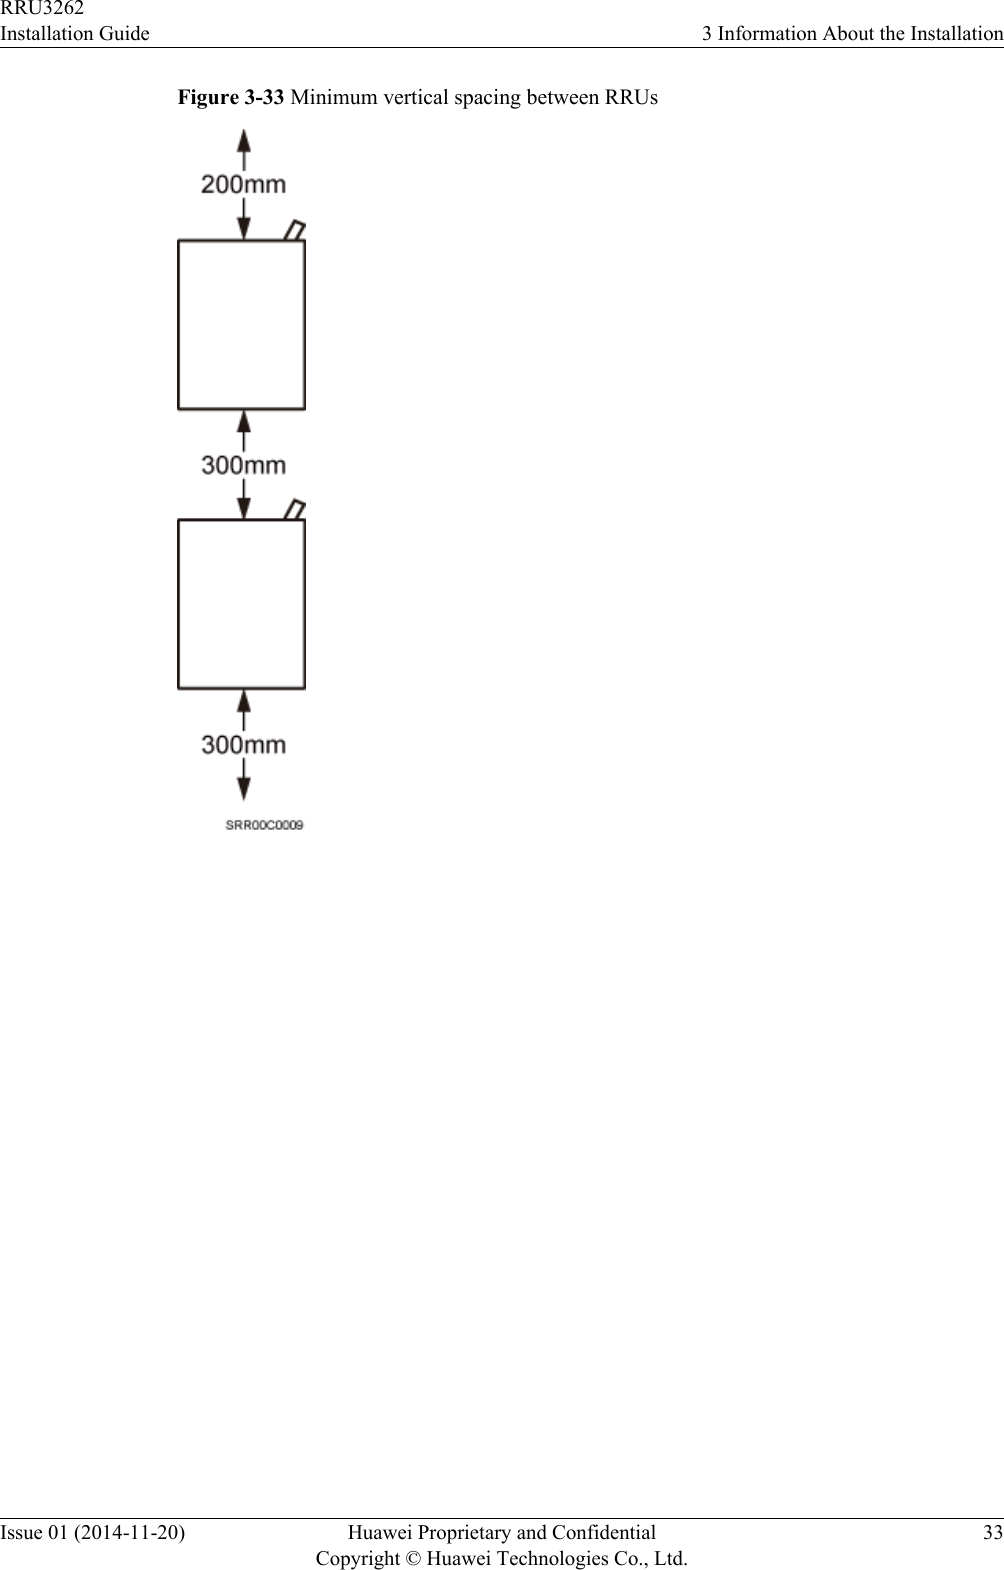 Figure 3-33 Minimum vertical spacing between RRUsRRU3262Installation Guide 3 Information About the InstallationIssue 01 (2014-11-20) Huawei Proprietary and ConfidentialCopyright © Huawei Technologies Co., Ltd.33